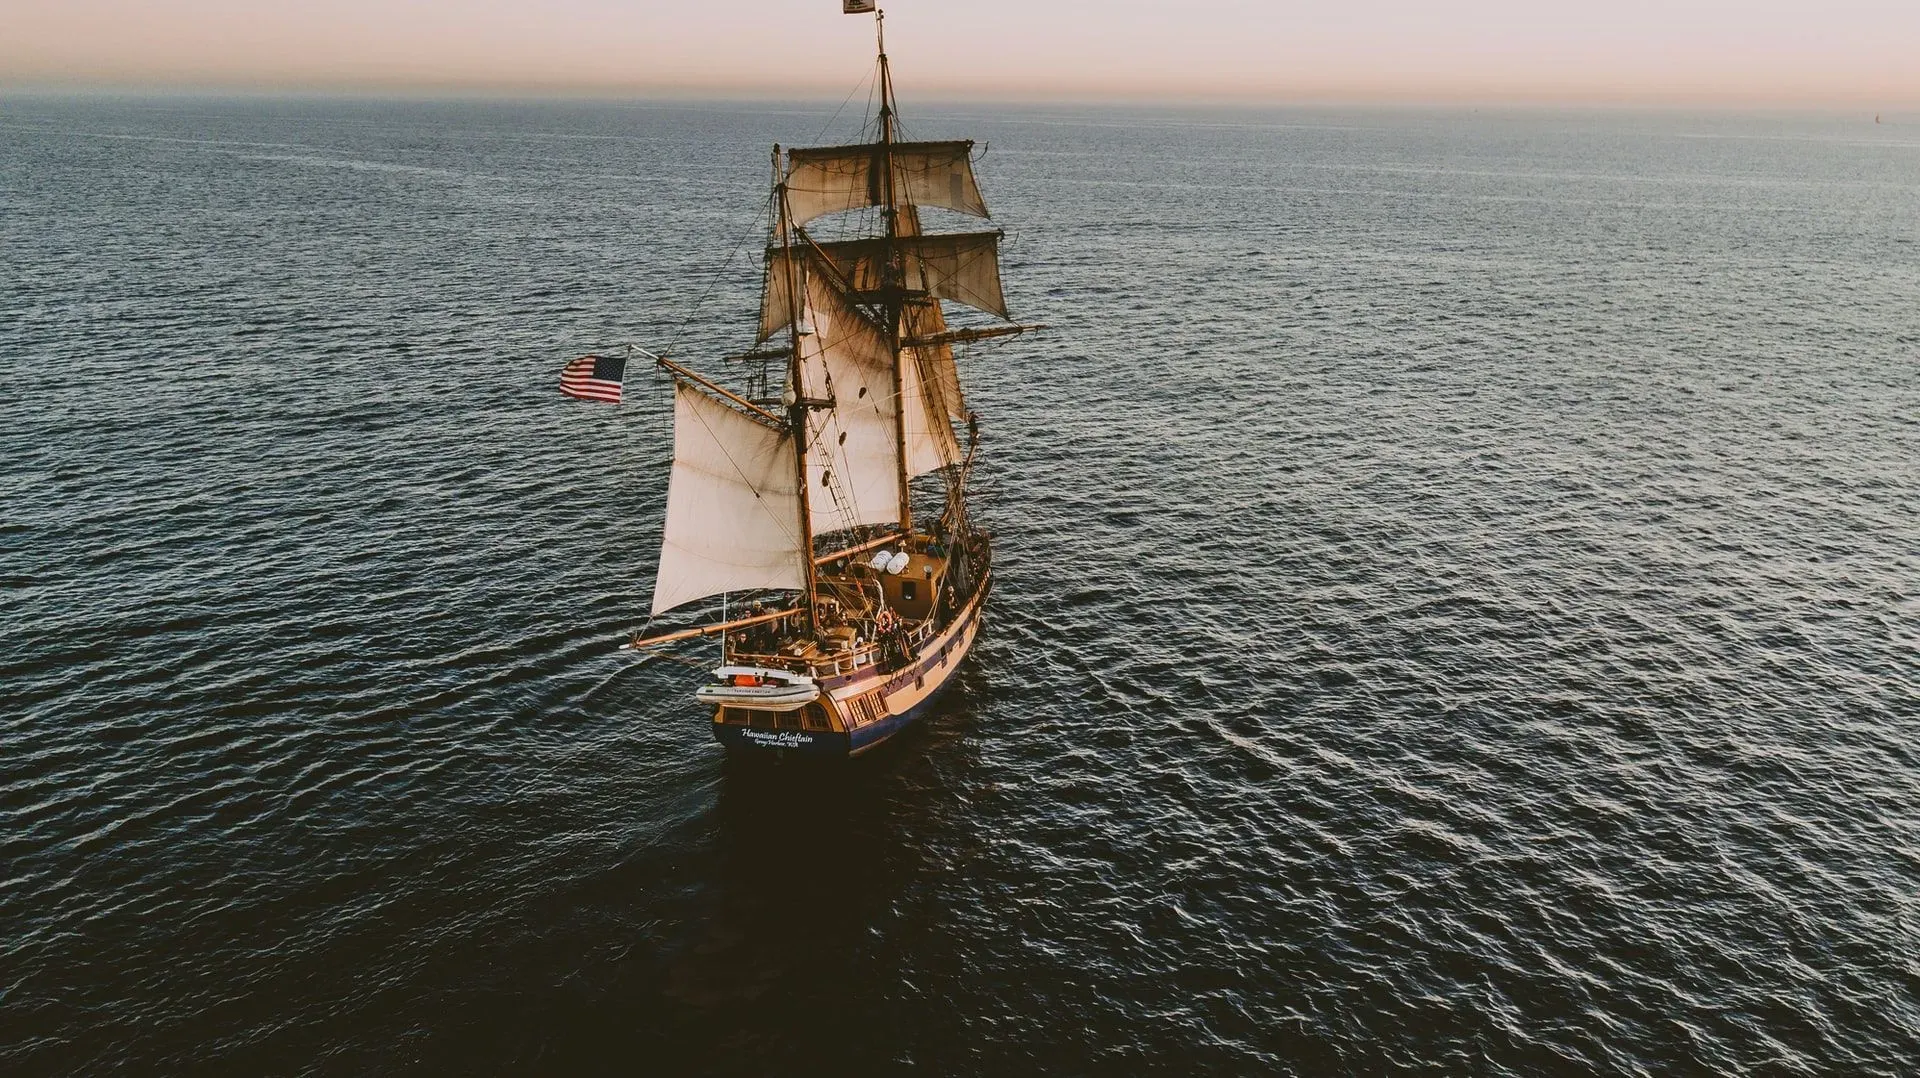 Mayflower voyage facts are interesting to read!